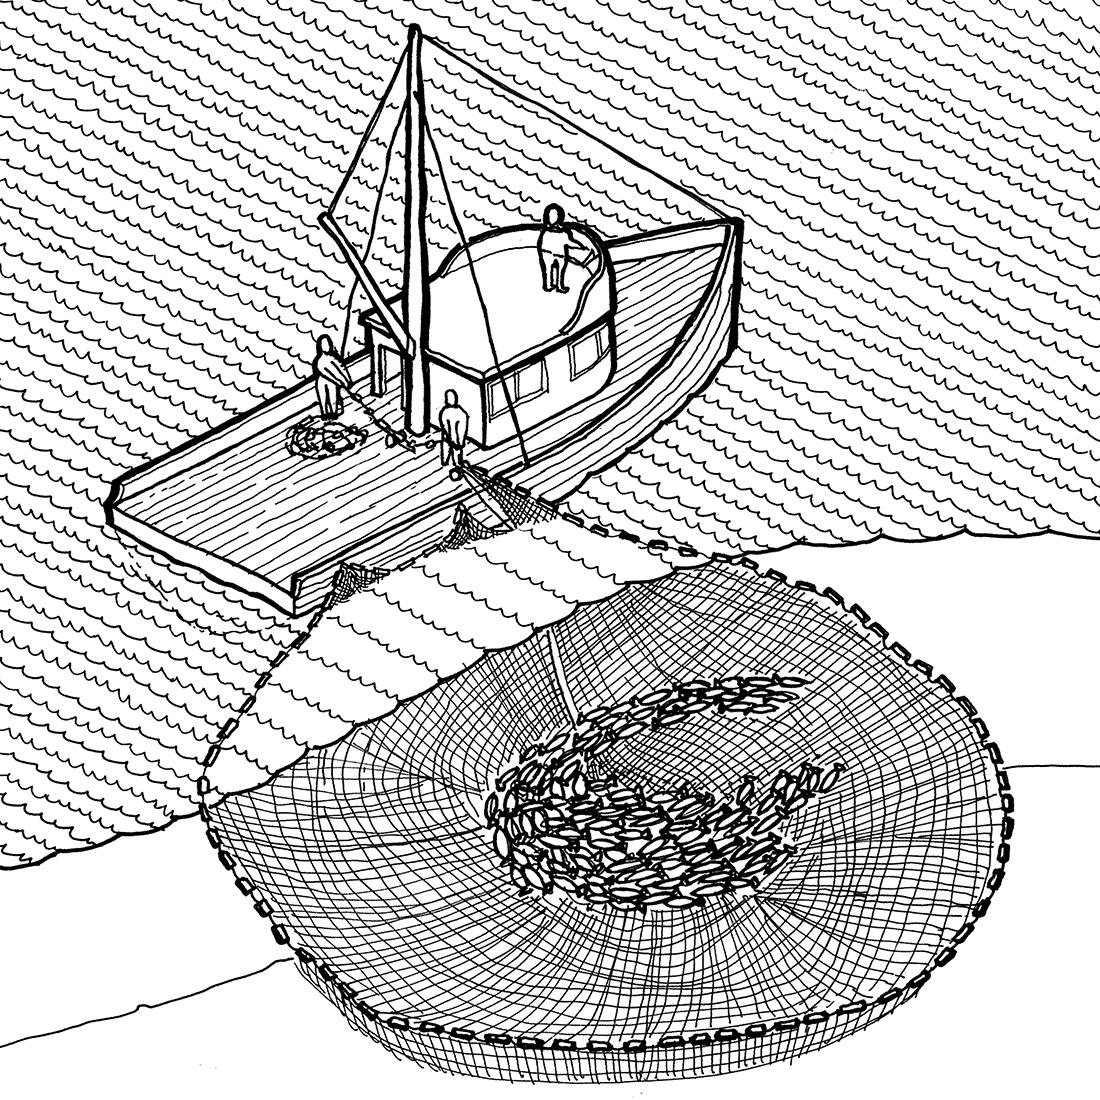 illustration of a fishing boat drawing in a net